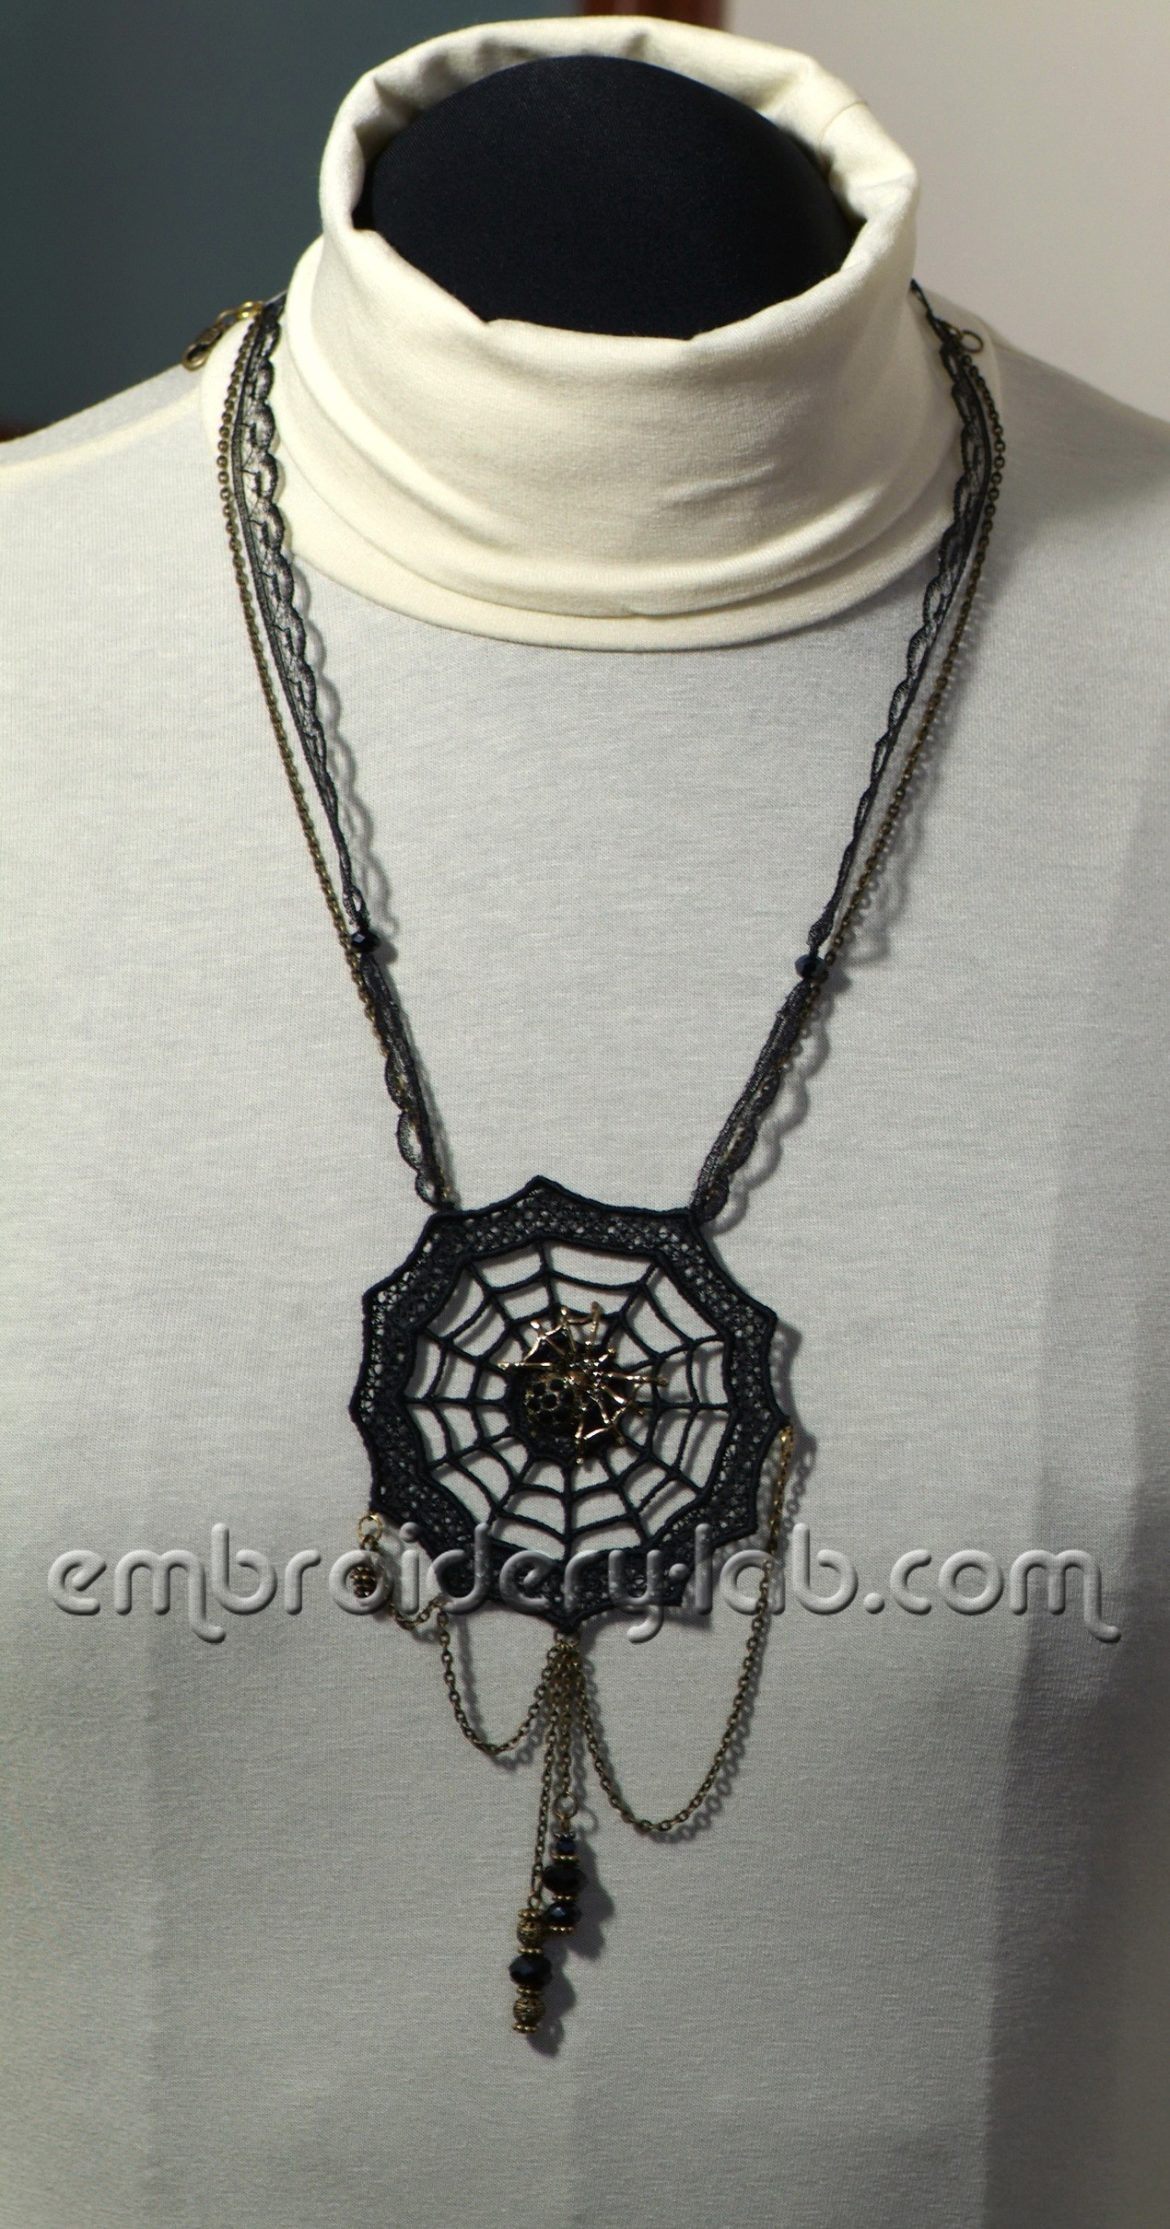 Necklace Spider's Web 0002